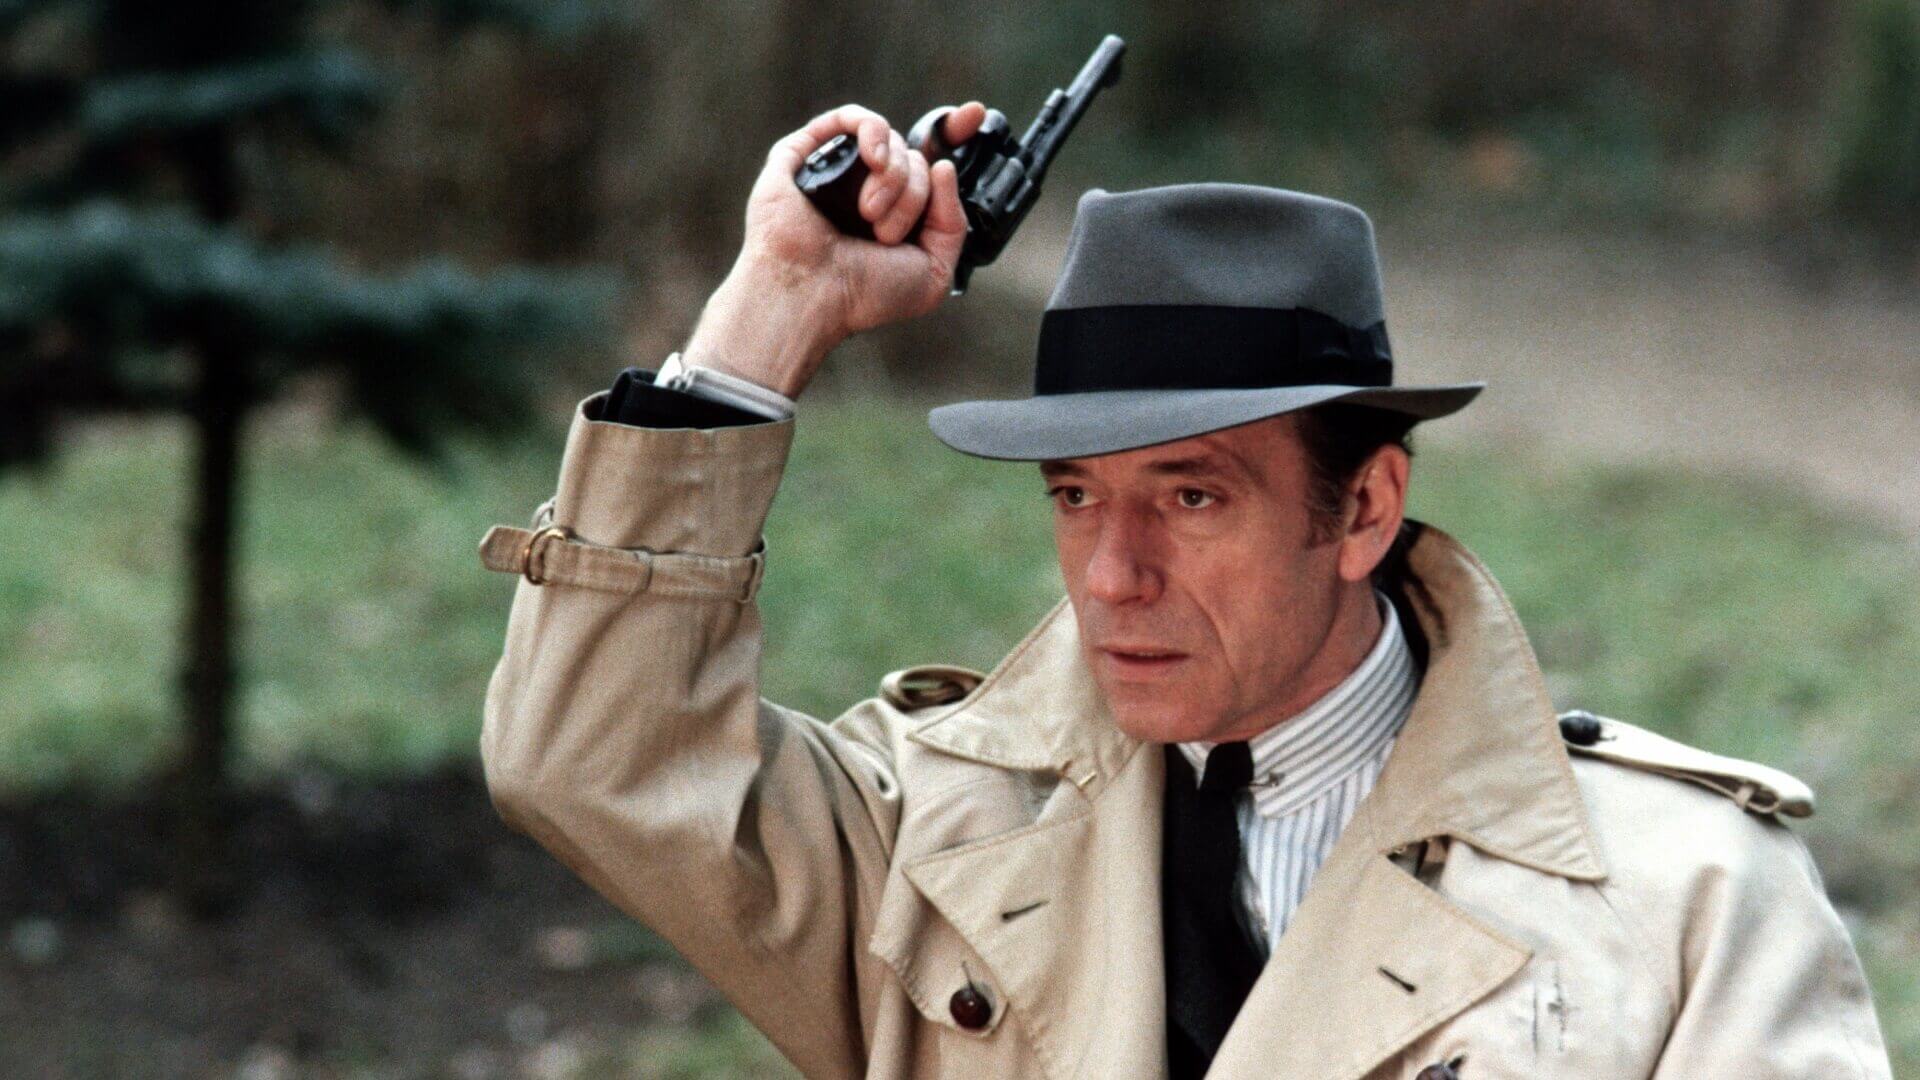 Red Circle Le cercle rouge Yves Montand